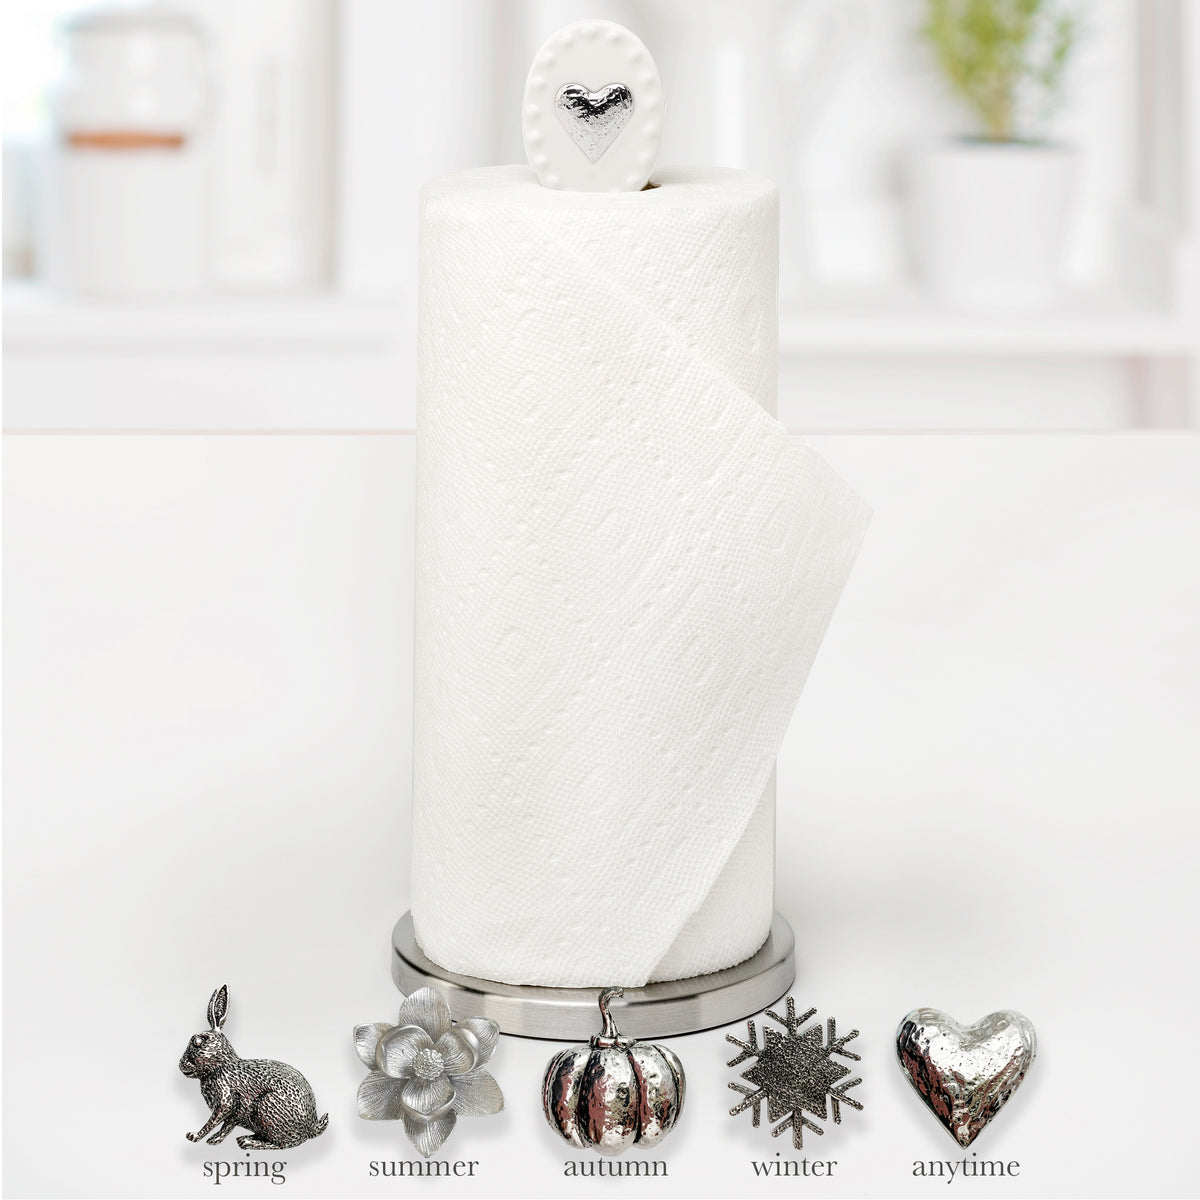 Magnetic Paper Towel Holder – The Better House